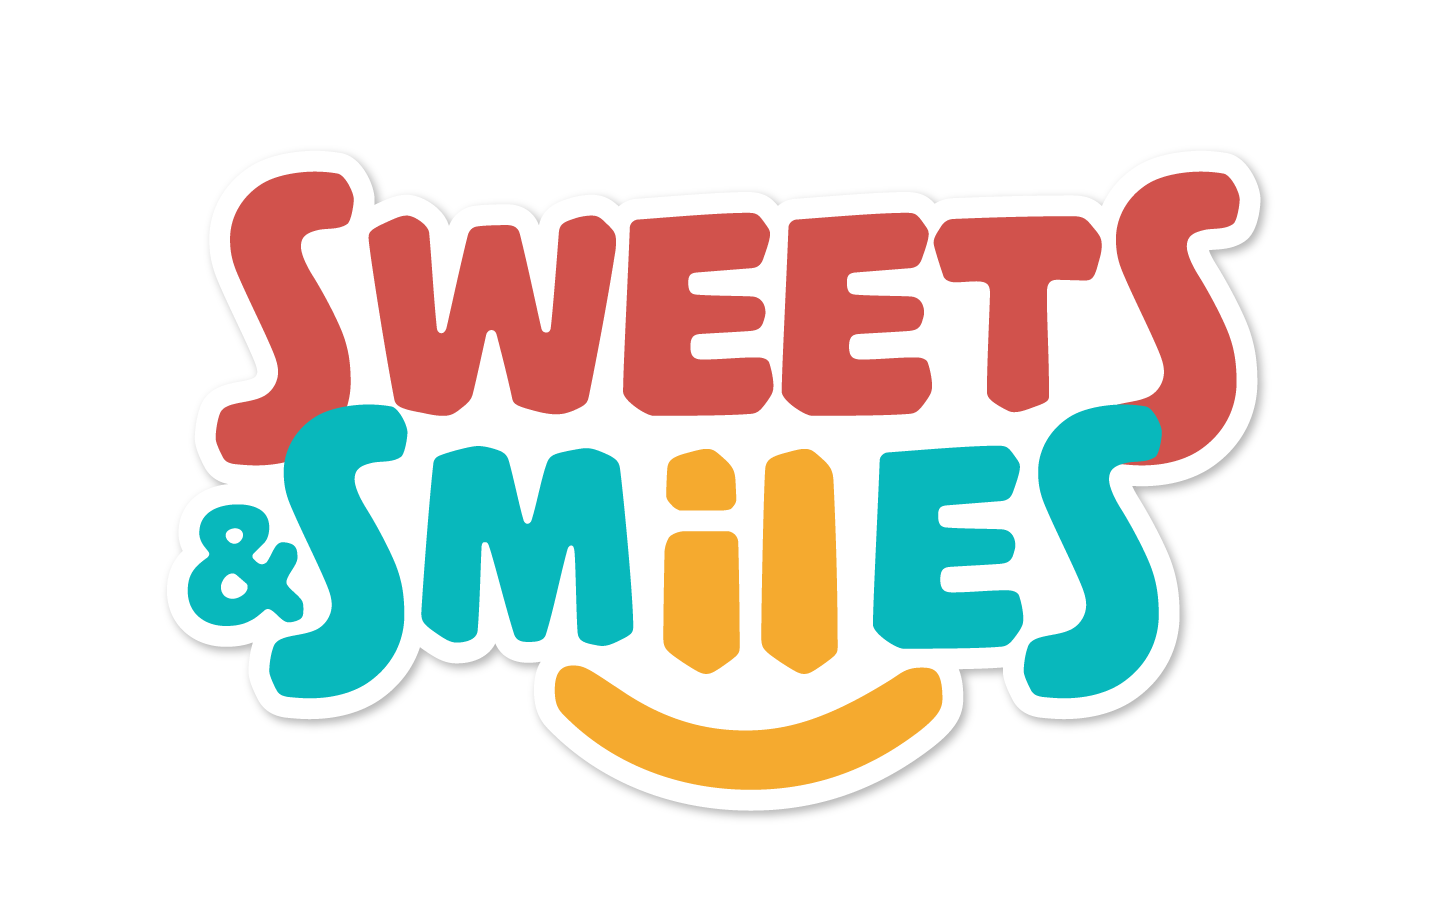 Sweets & Smiles